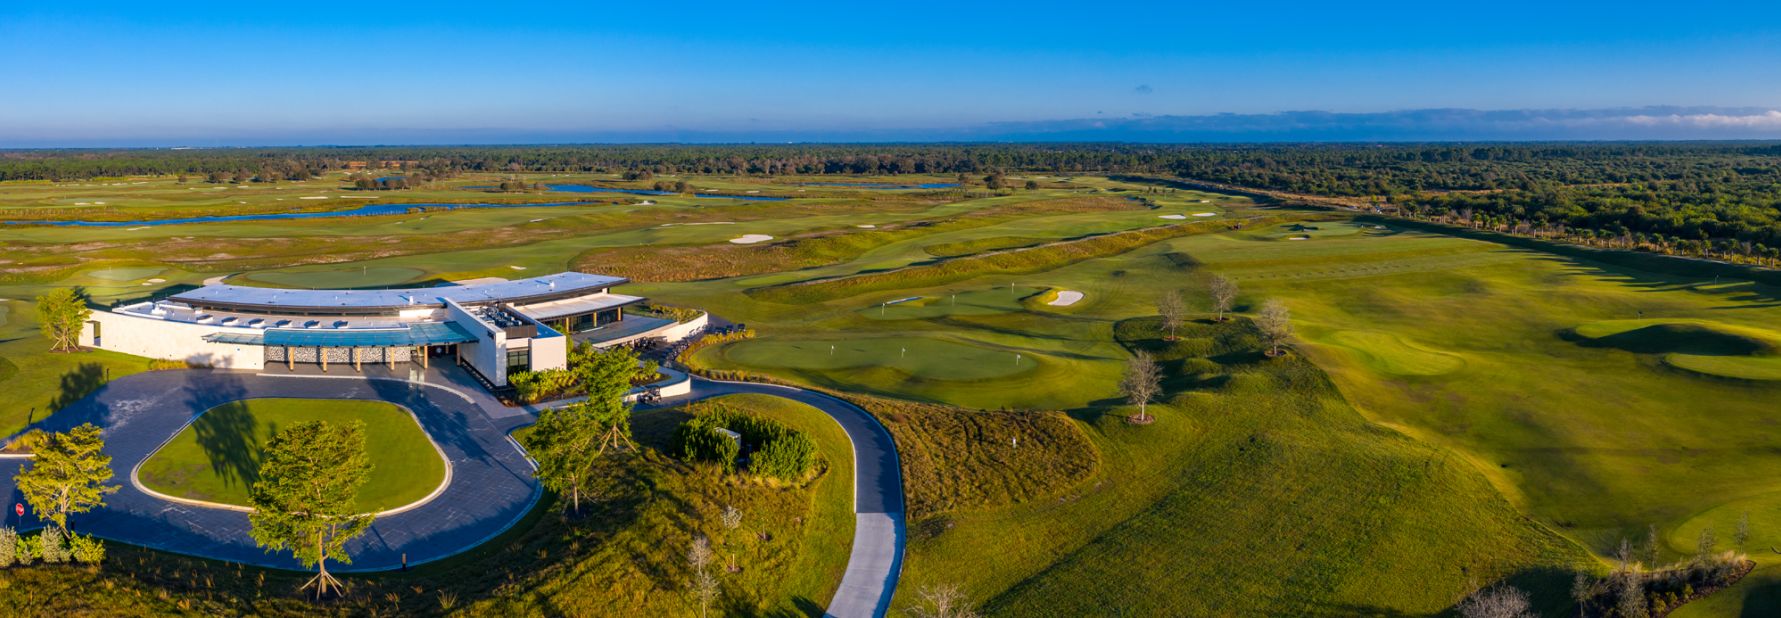 23 brand-new golf courses expected to open in 2023